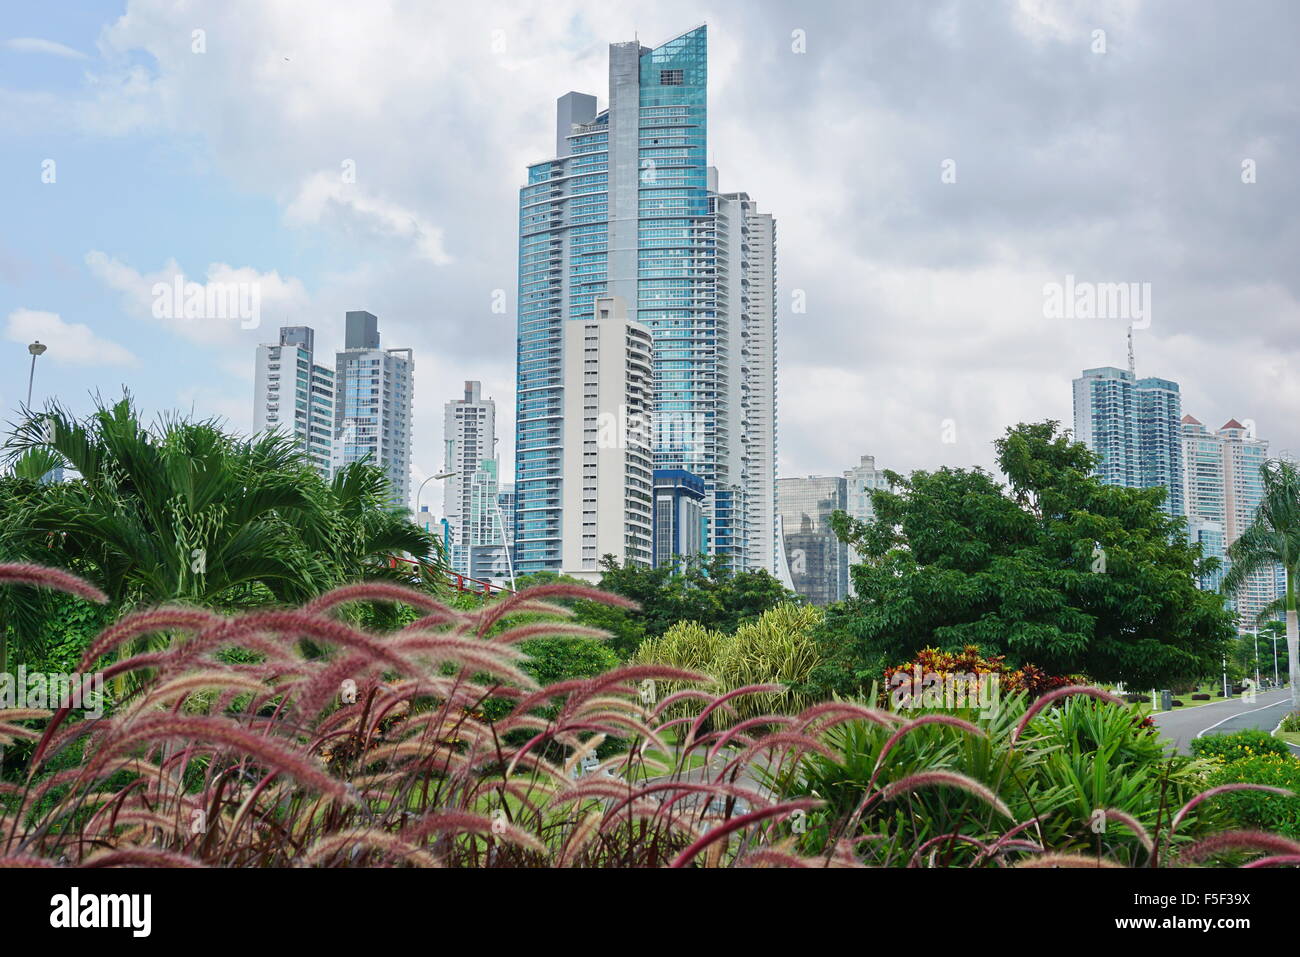 Skyscrapers with cloudy sky and plants in foreground, Panama City, Panama, Central America Stock Photo